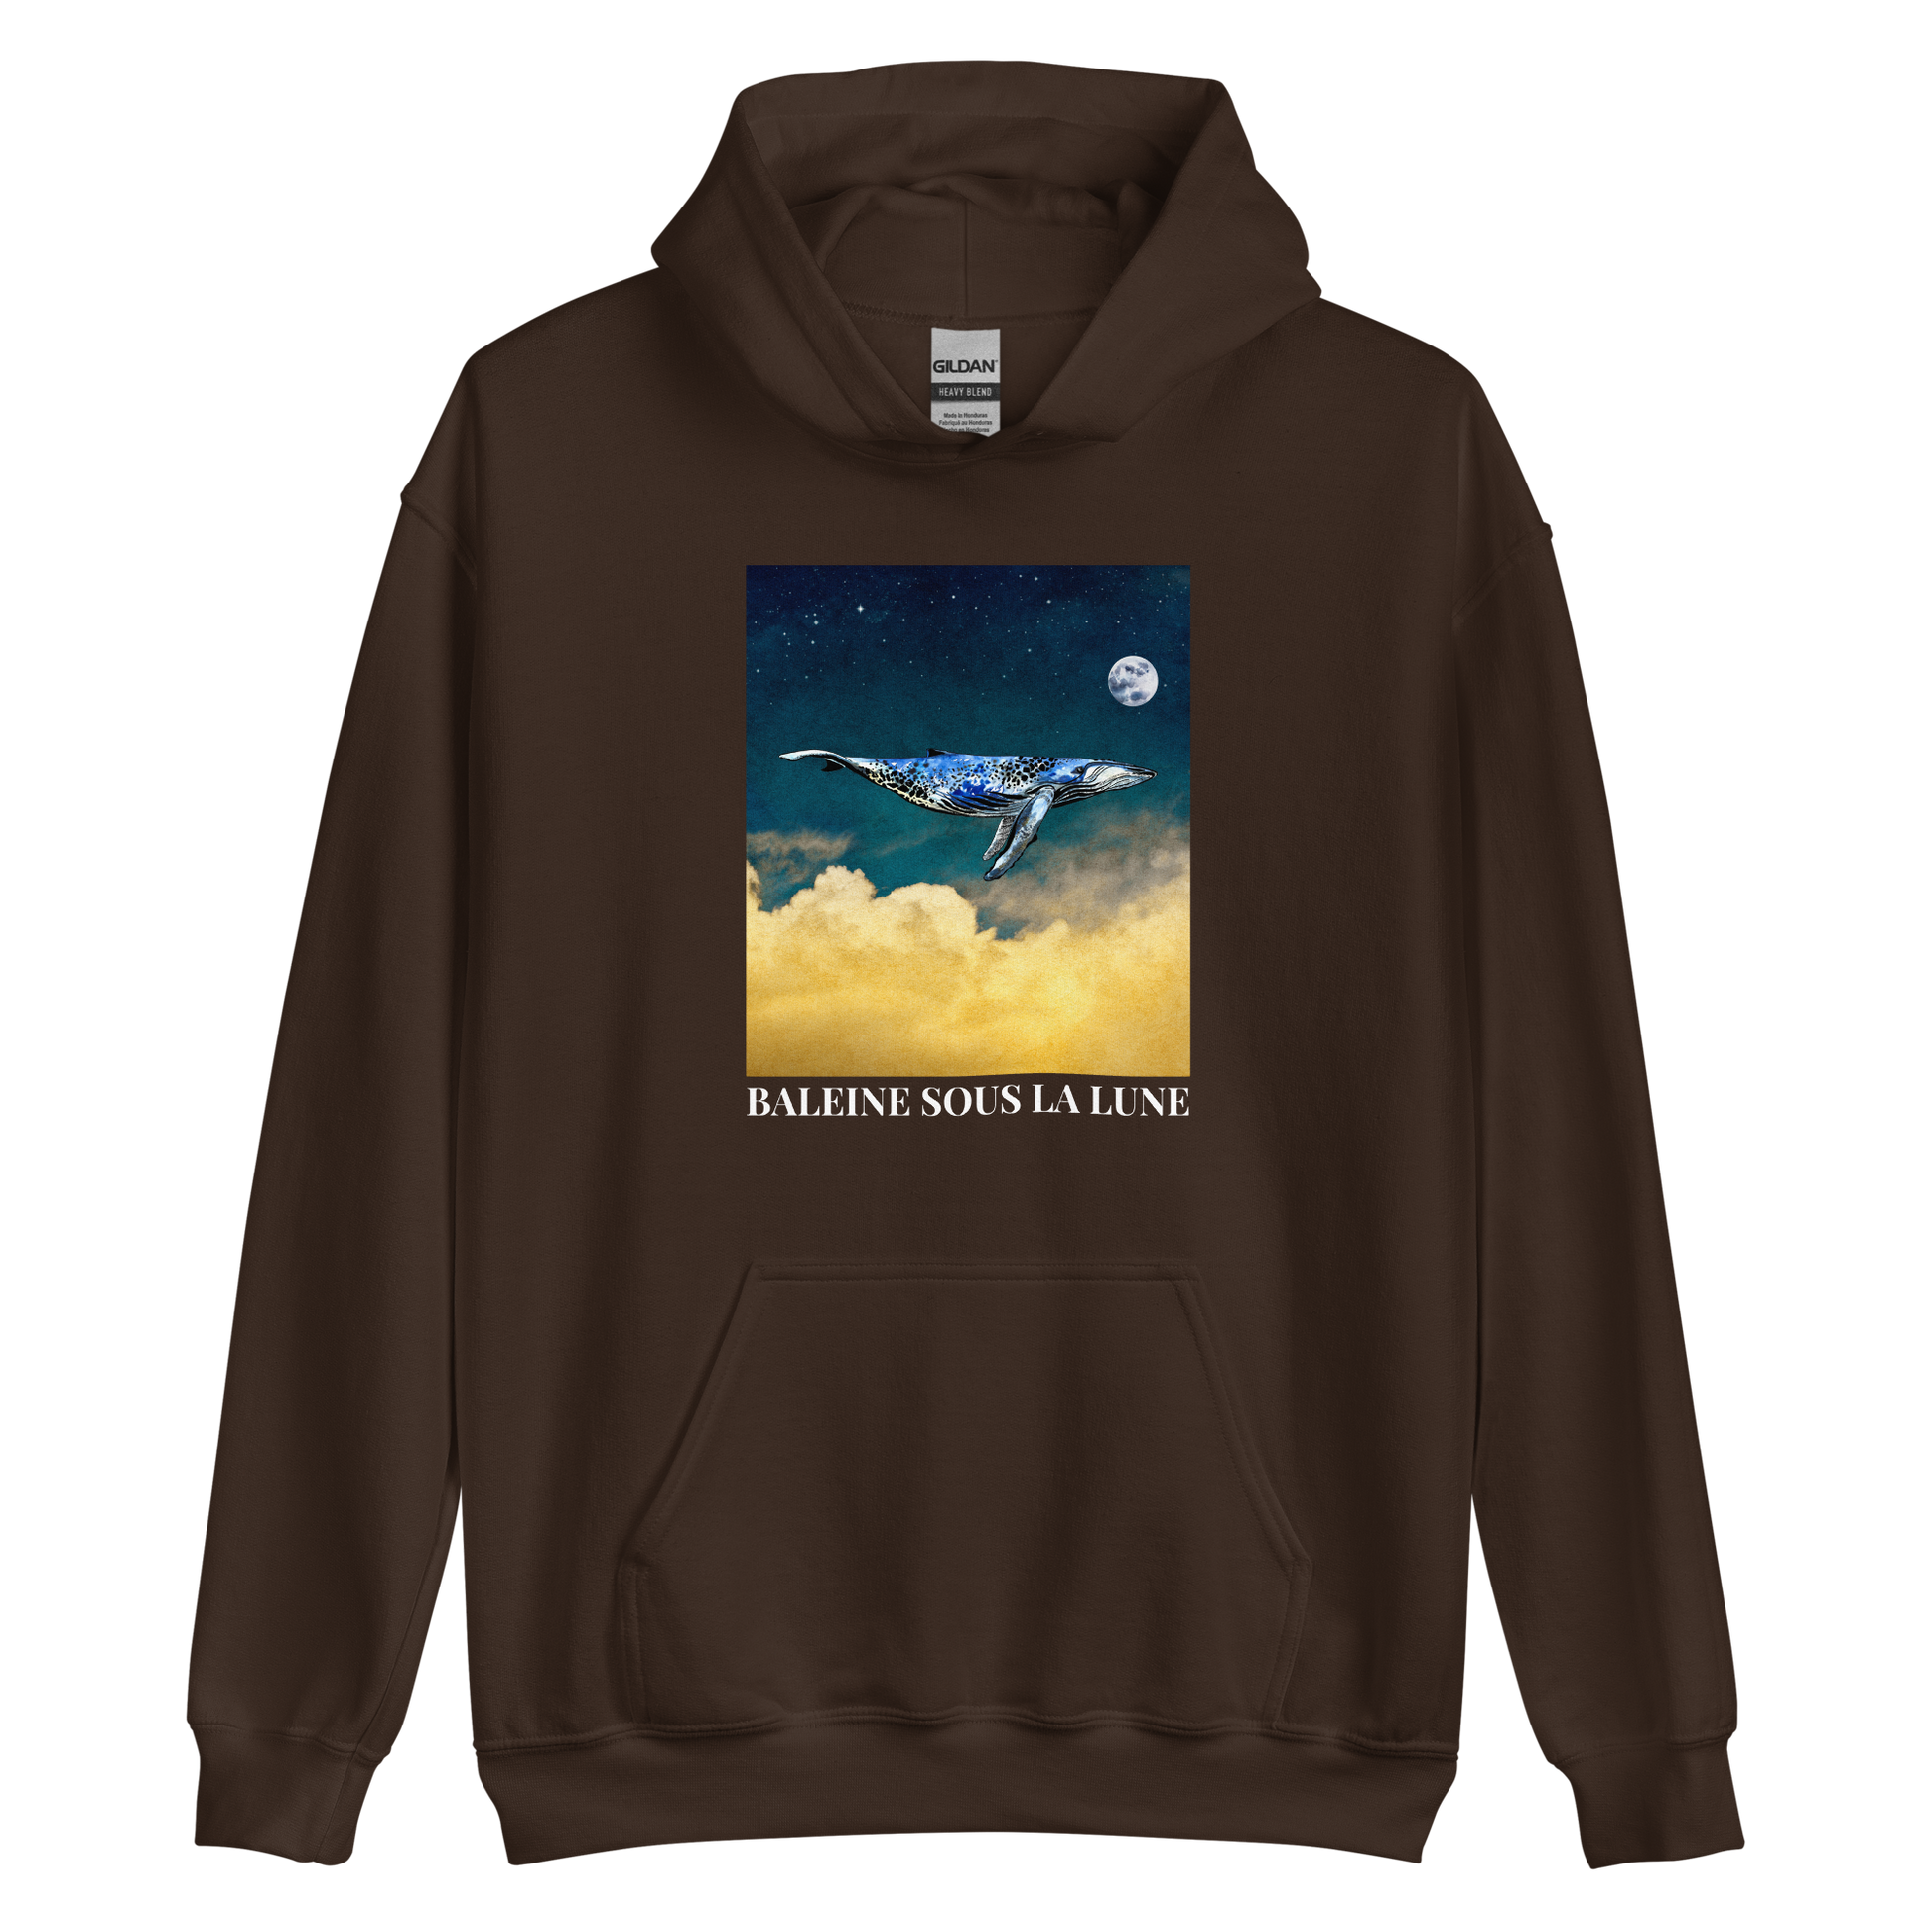 Dark Chocolate Whale Hoodie featuring a charming Whale Under The Moon graphic on the chest - Cool Graphic Whale Hoodies - Boozy Fox